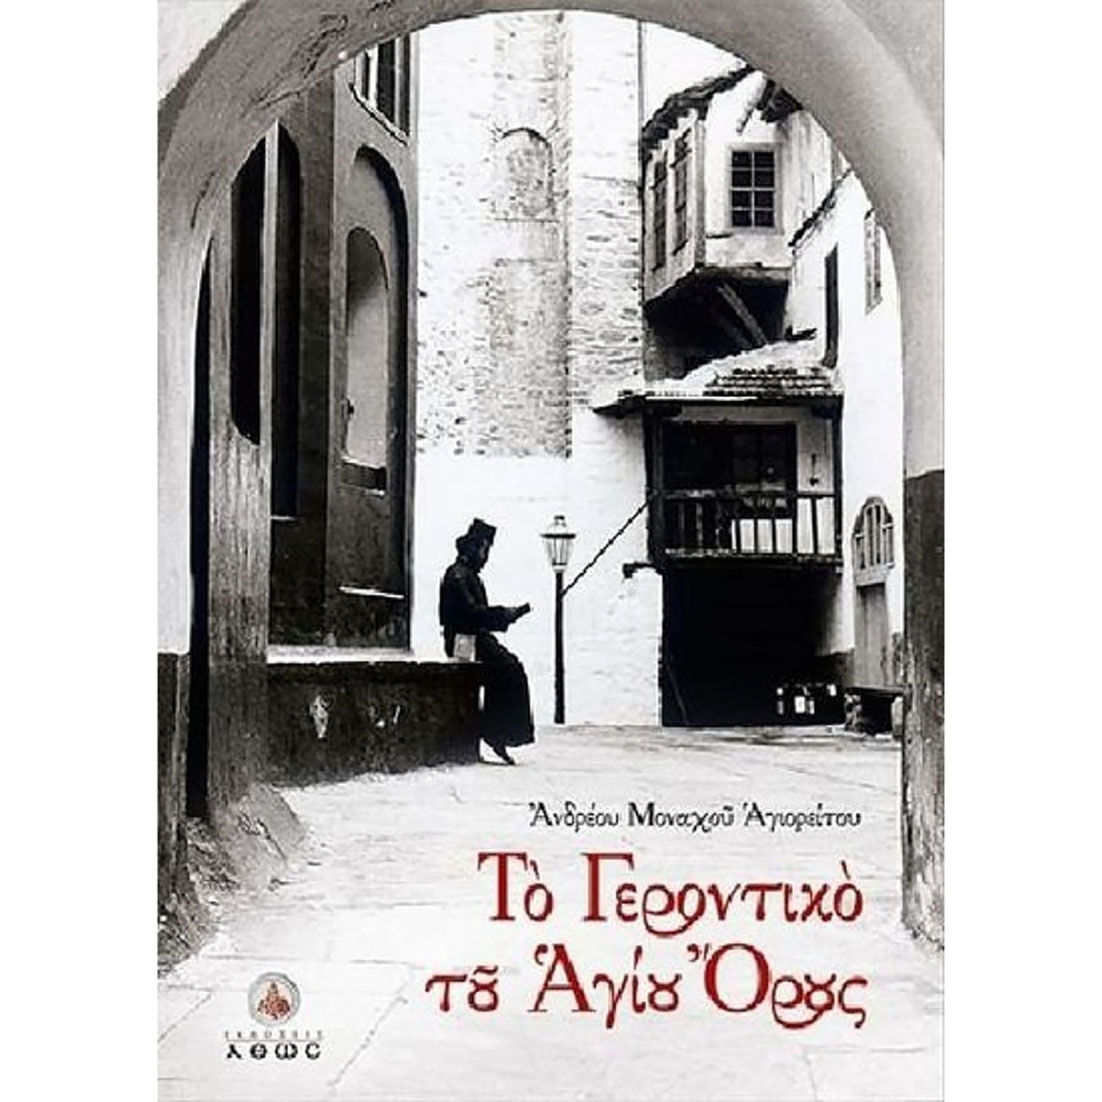 The Elder of Mount Athos (Andreos Monk of Mount Athos) - Stories from the living tradition of desert life